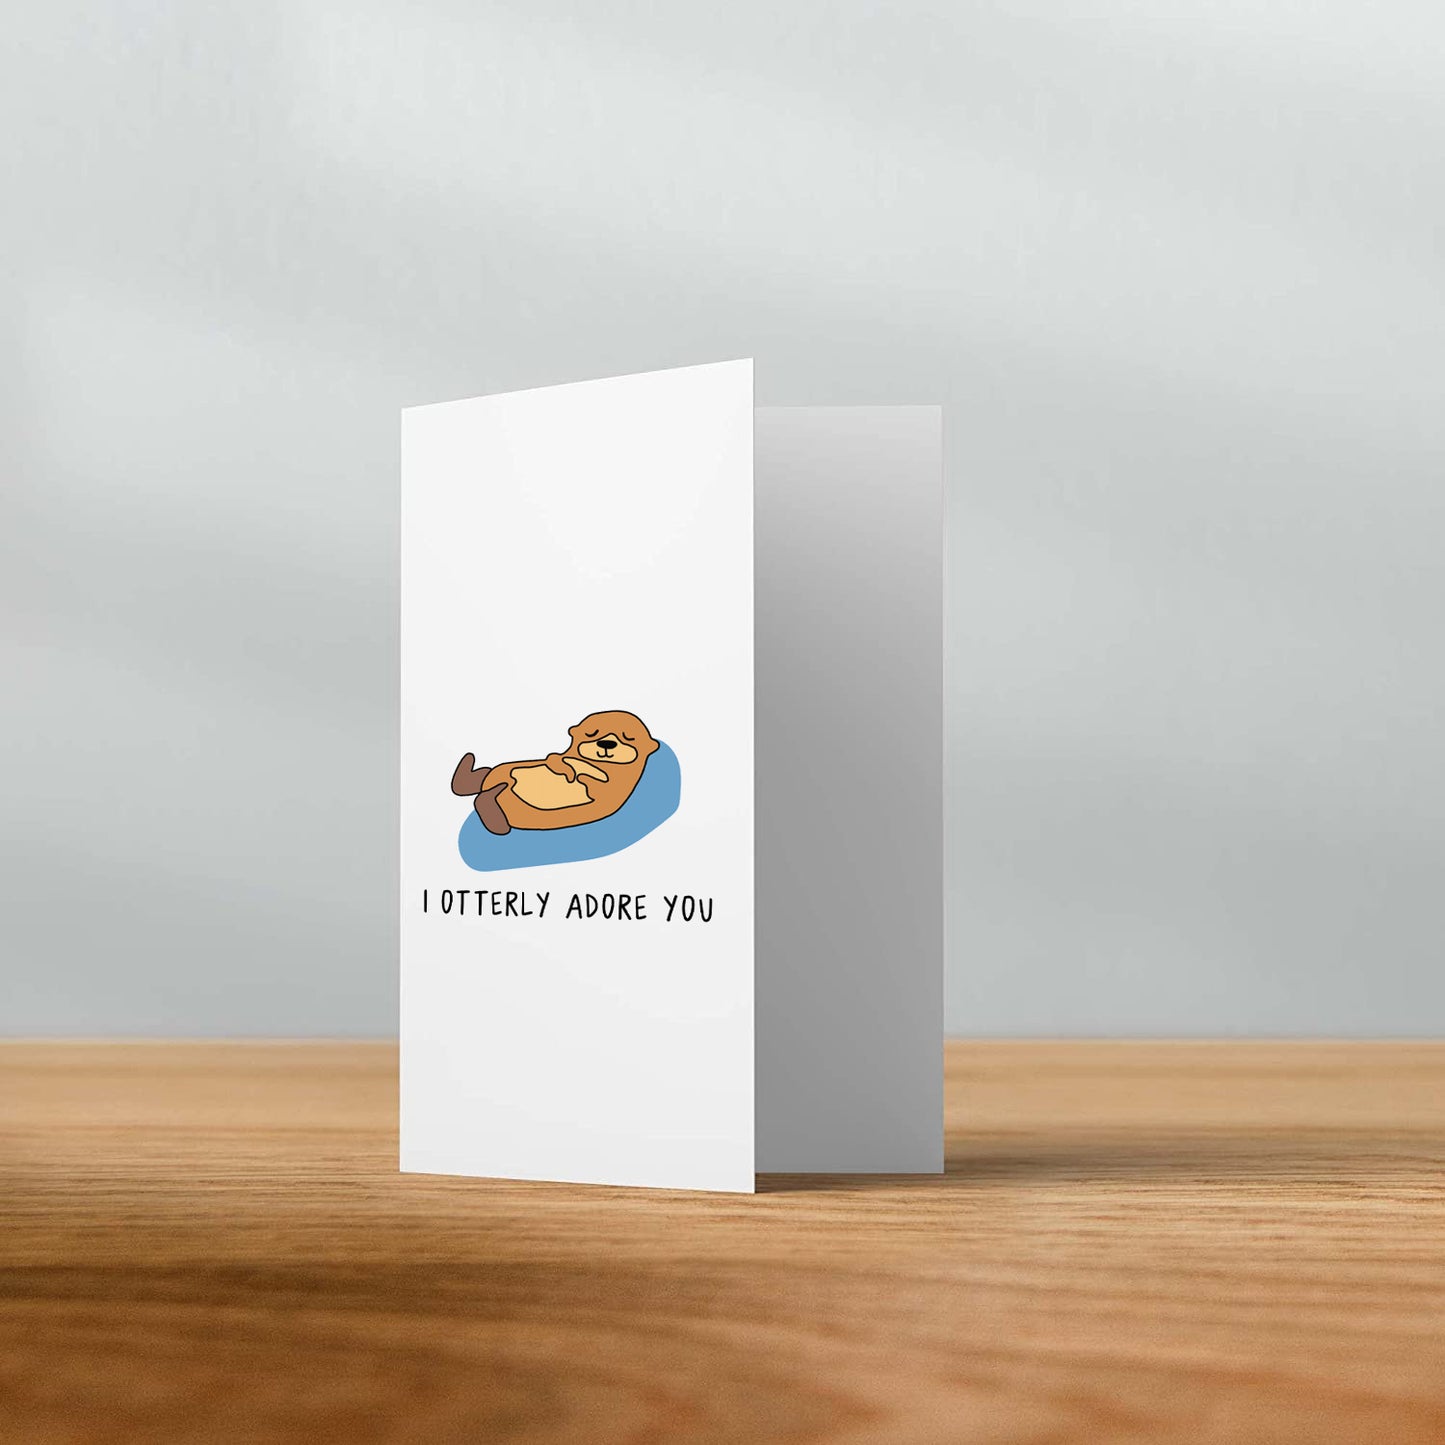 Send a heartfelt card with an adorable otter design to express your gratitude. This rockdoodles I Otterly Adore You Card comes with a natural envelope for an eco-friendly touch.